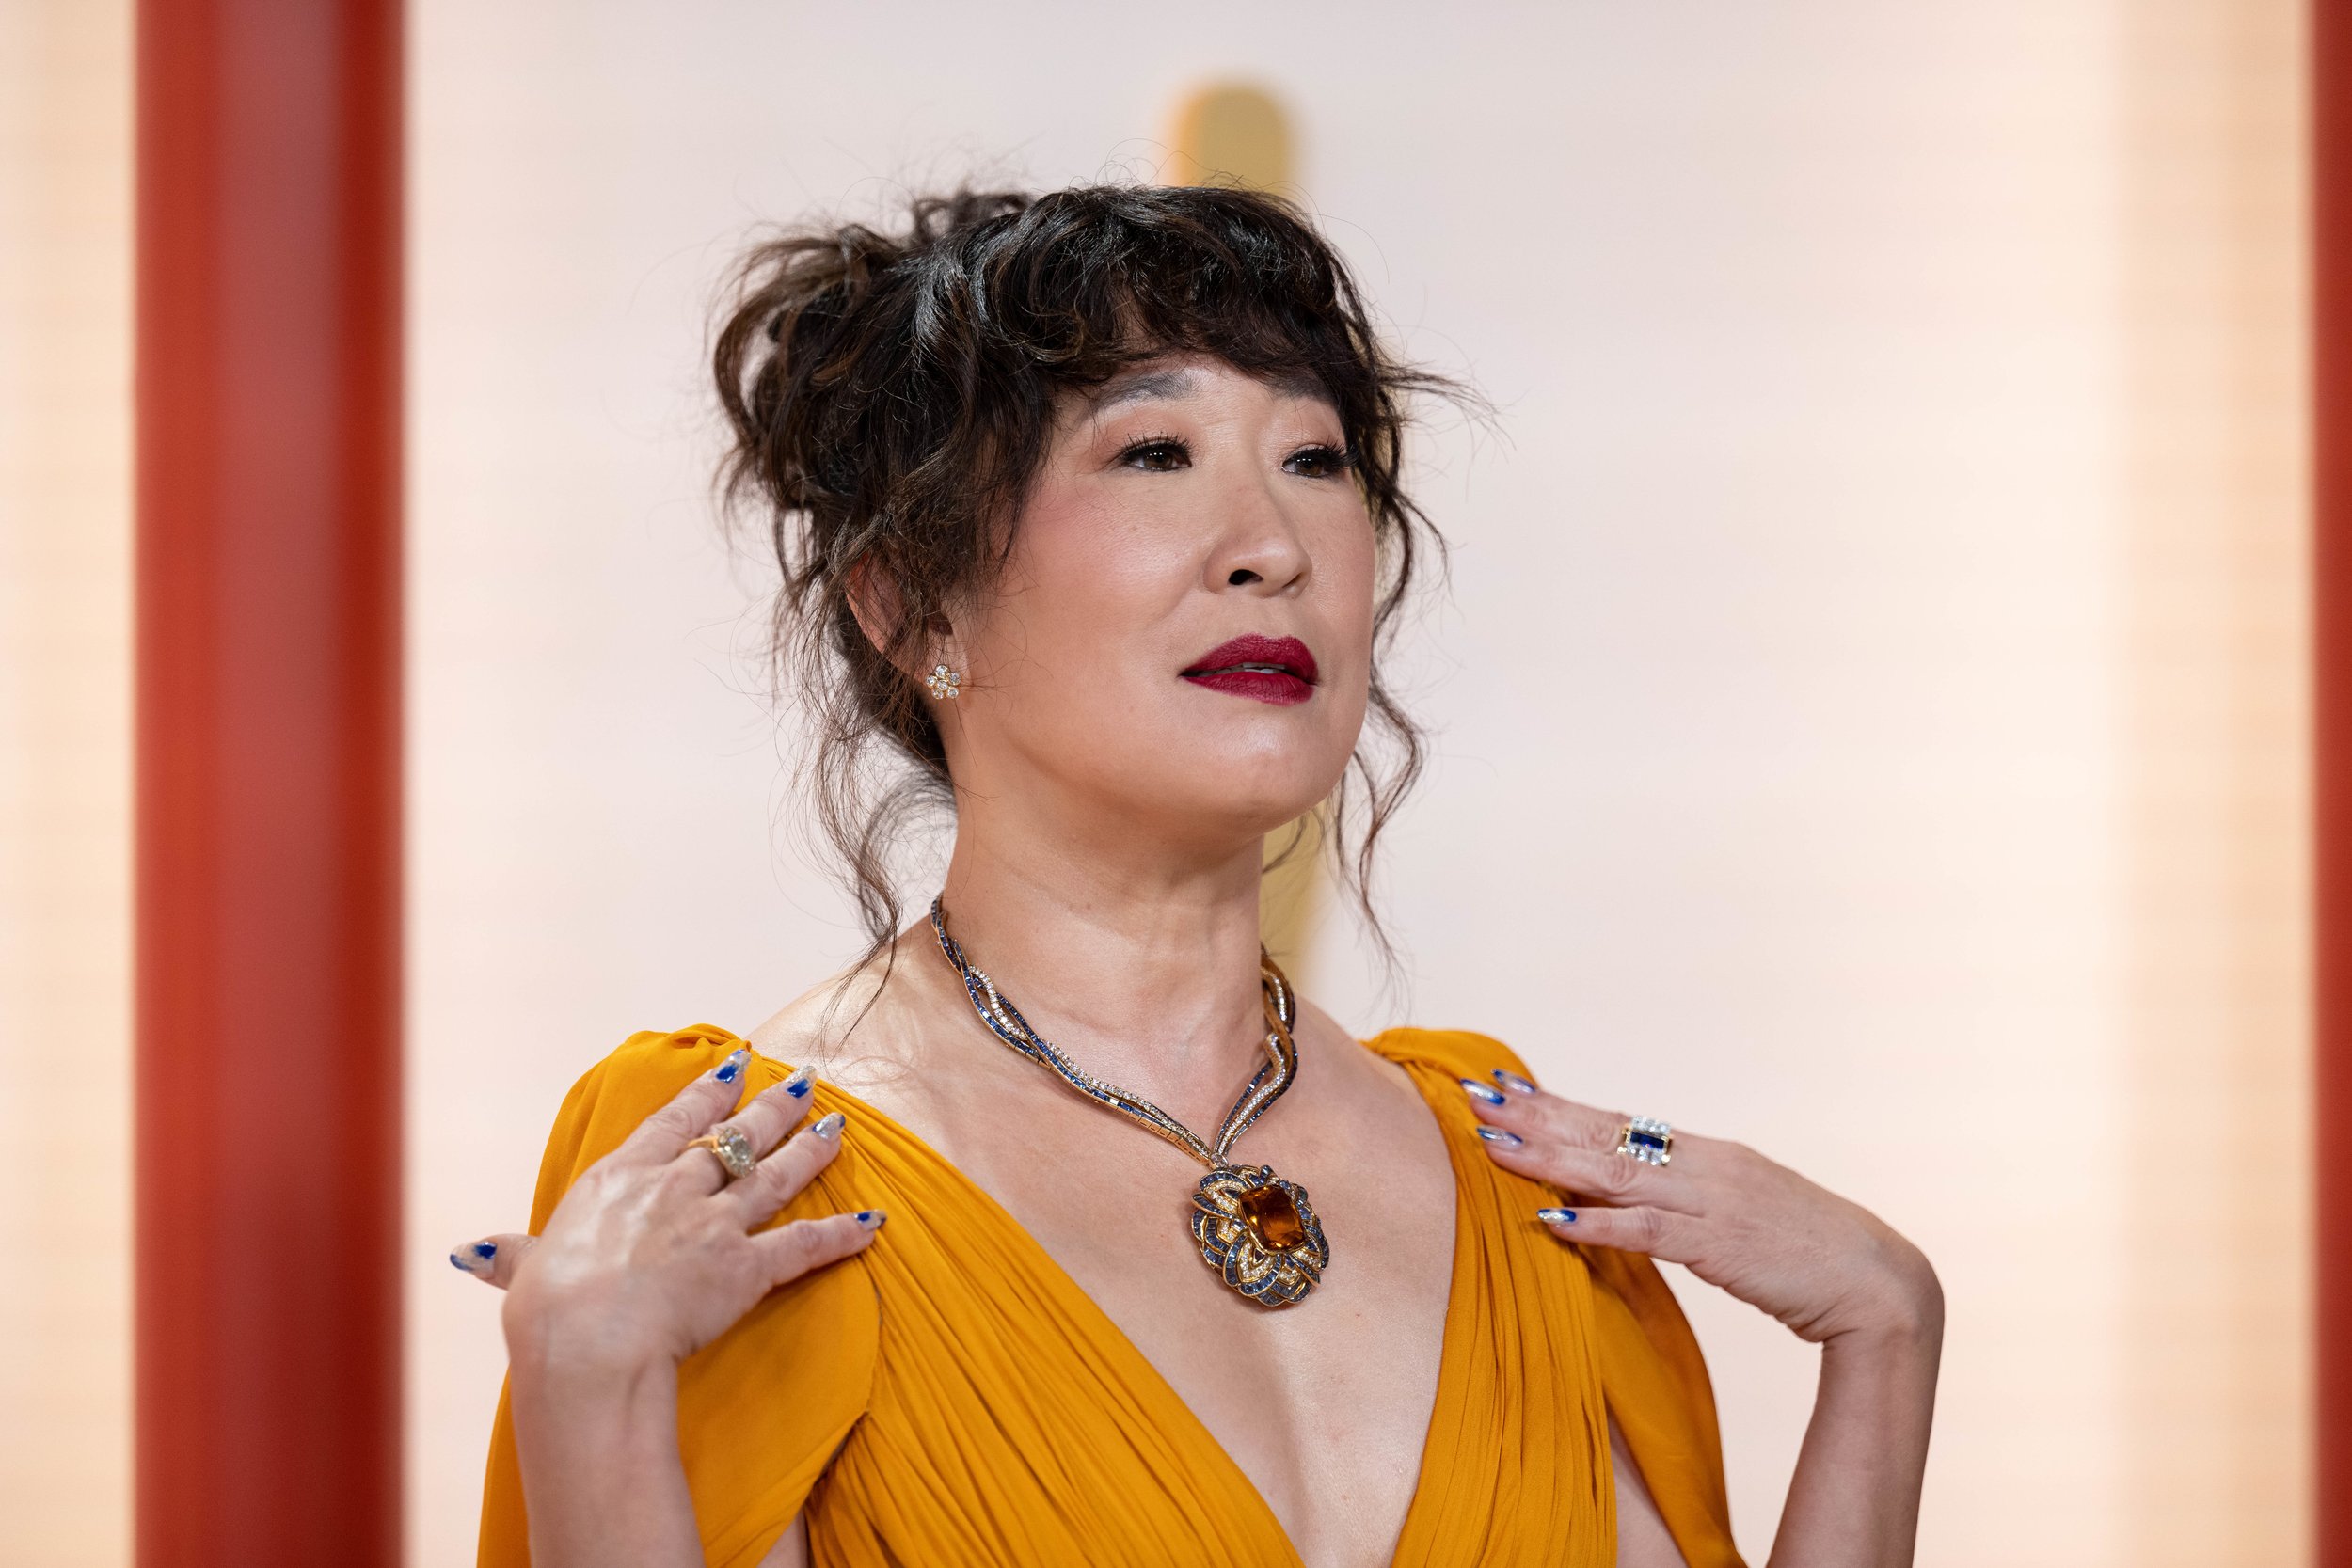 Sandra Oh arrives on the red carpet of The 95th Oscars® at the Dolby